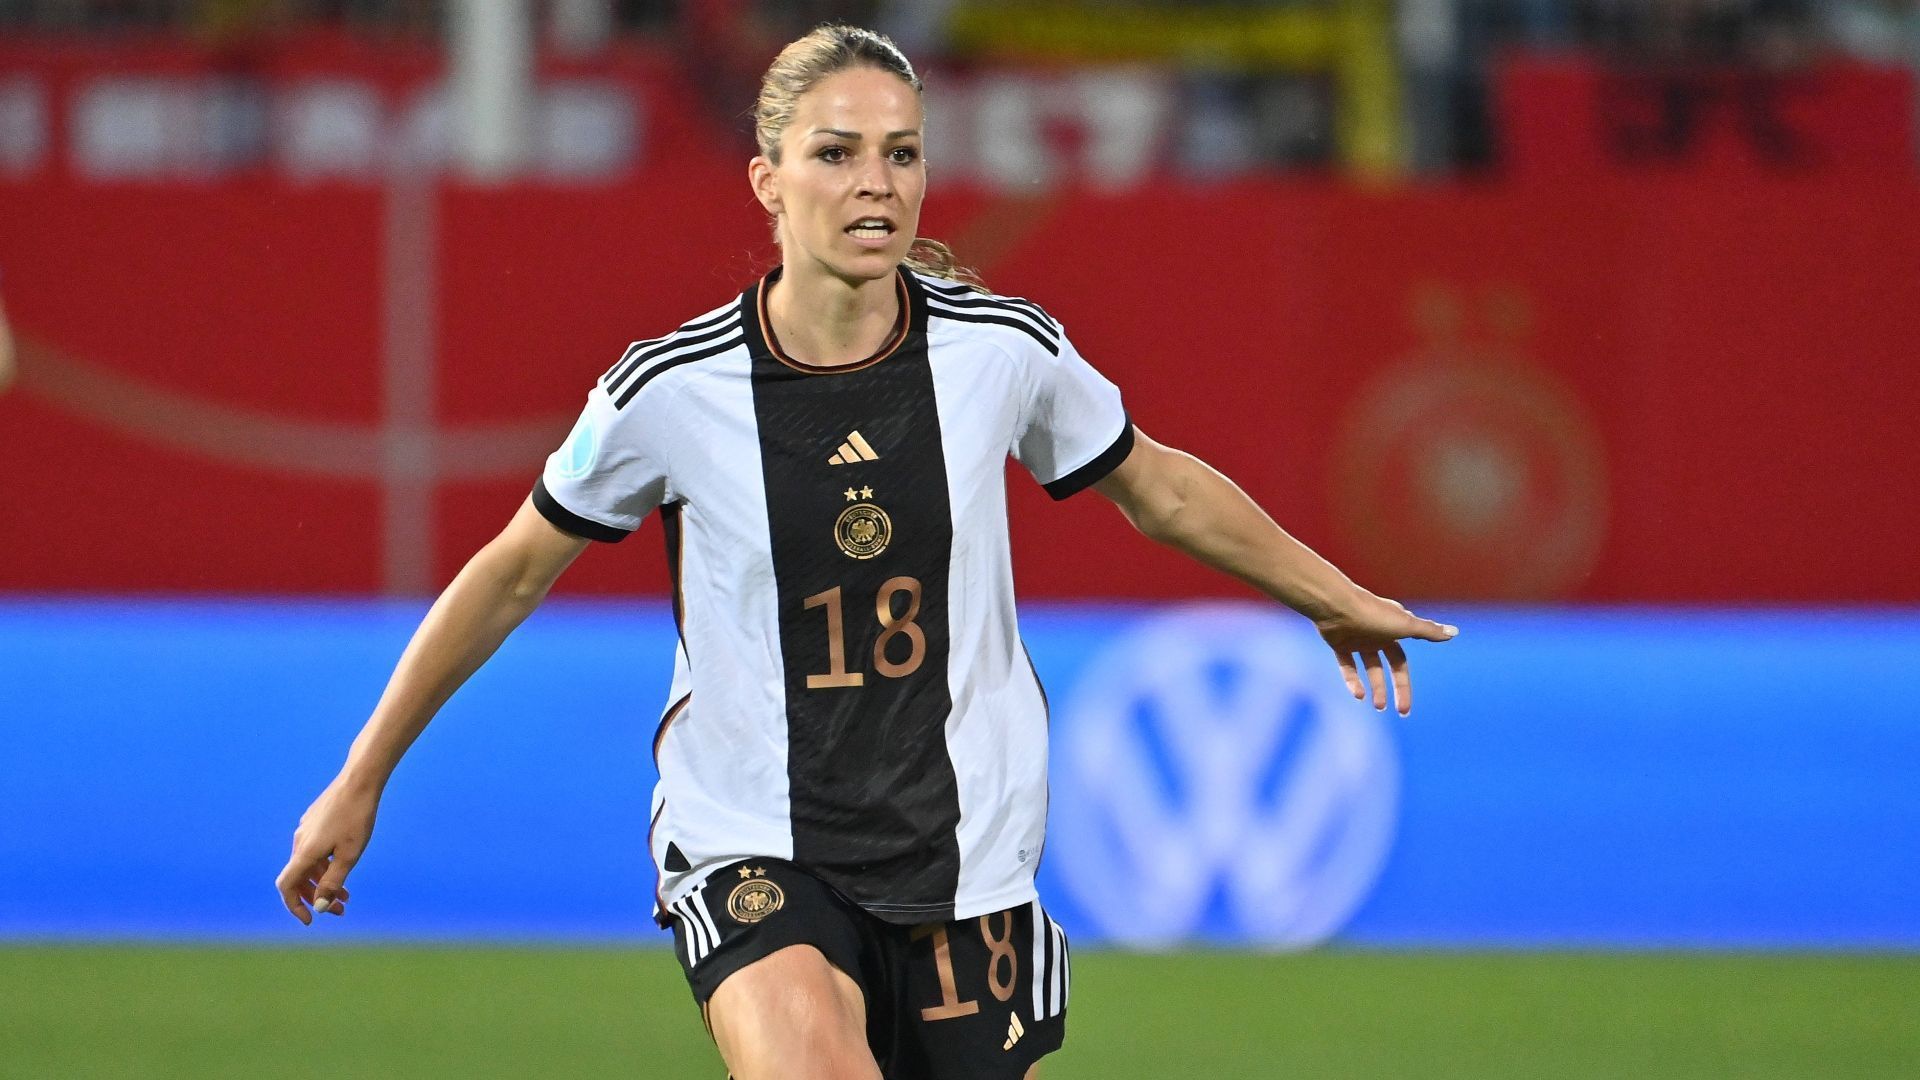 
                <strong>Melanie Leupolz</strong><br>
                &#x2022; <strong>Position: </strong>Mittelfeld/Angriff<br>&#x2022; <strong>Verein: </strong>FC Chelsea<br>&#x2022; <strong>Trikotnummer: </strong><br>&#x2022; <strong>Alter: </strong><br>&#x2022; <strong>Länderspiele: </strong><br>&#x2022; <strong>Länderspiel-Tore: </strong><br>
              